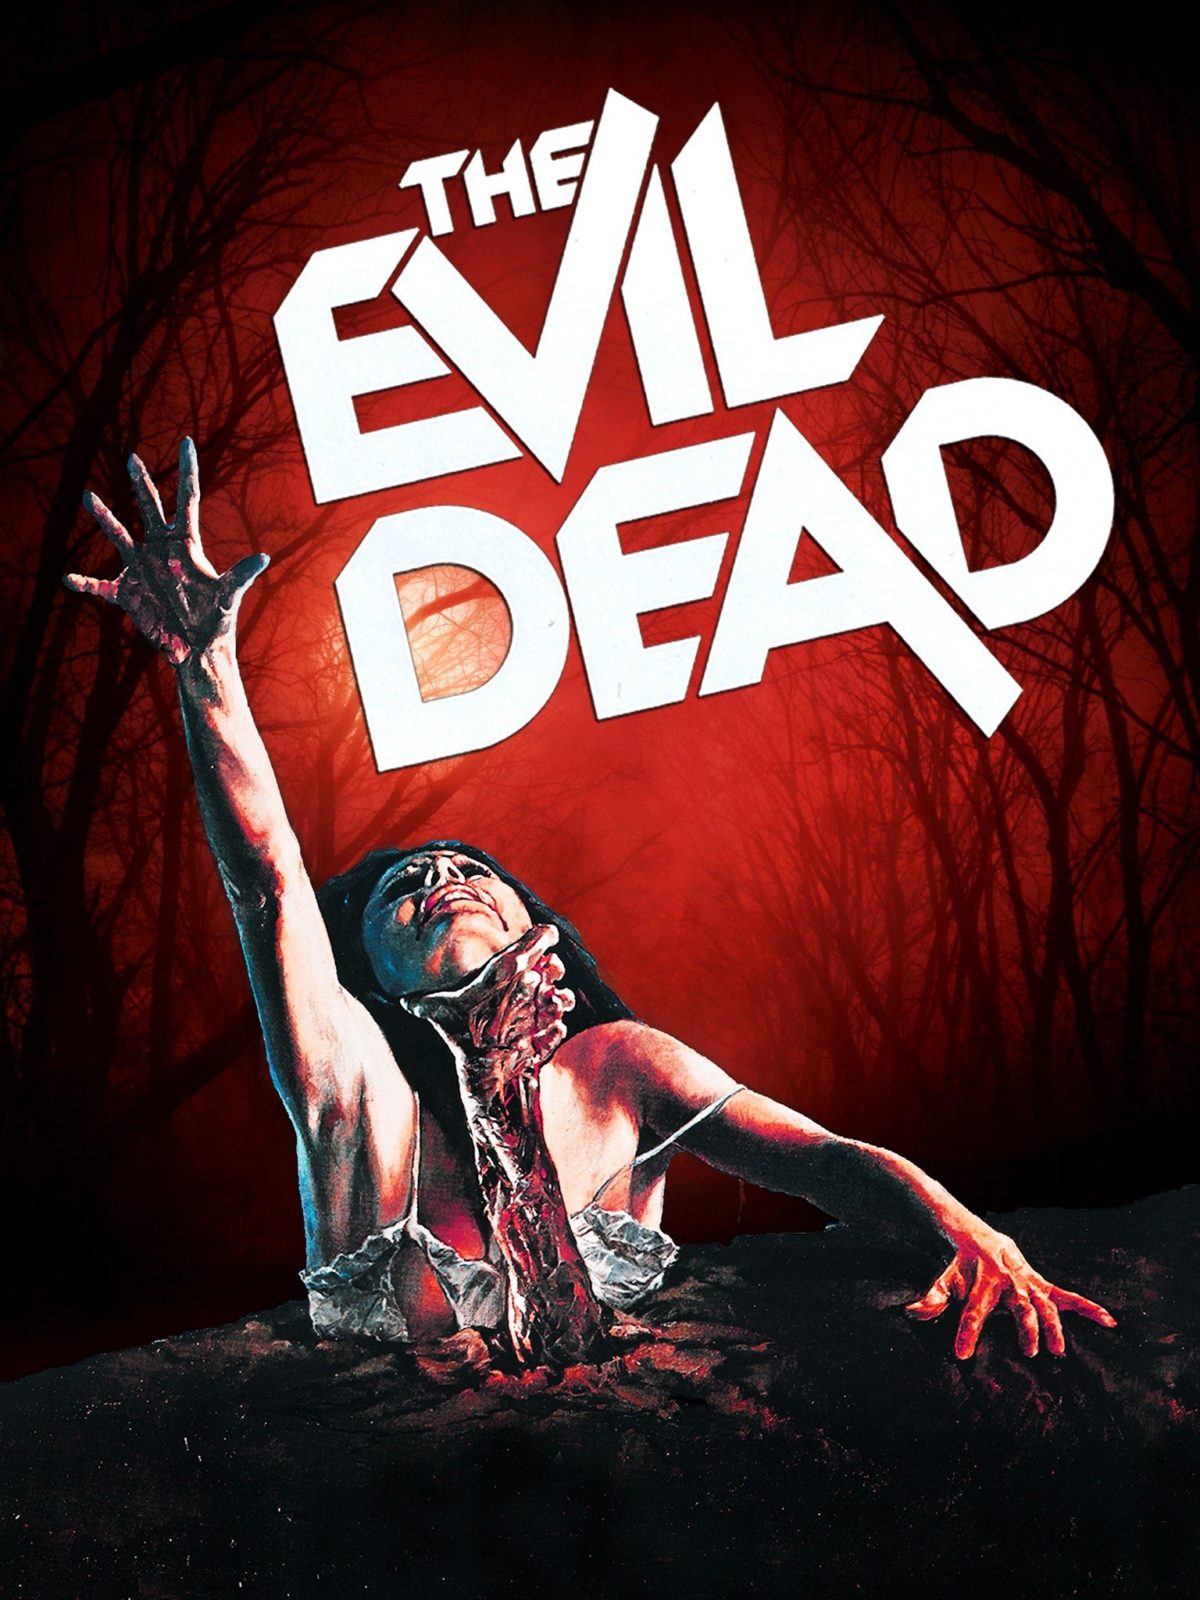 Evil Dead Rise Coming Soon to HBO Max! - Movie & TV Reviews, Celebrity News